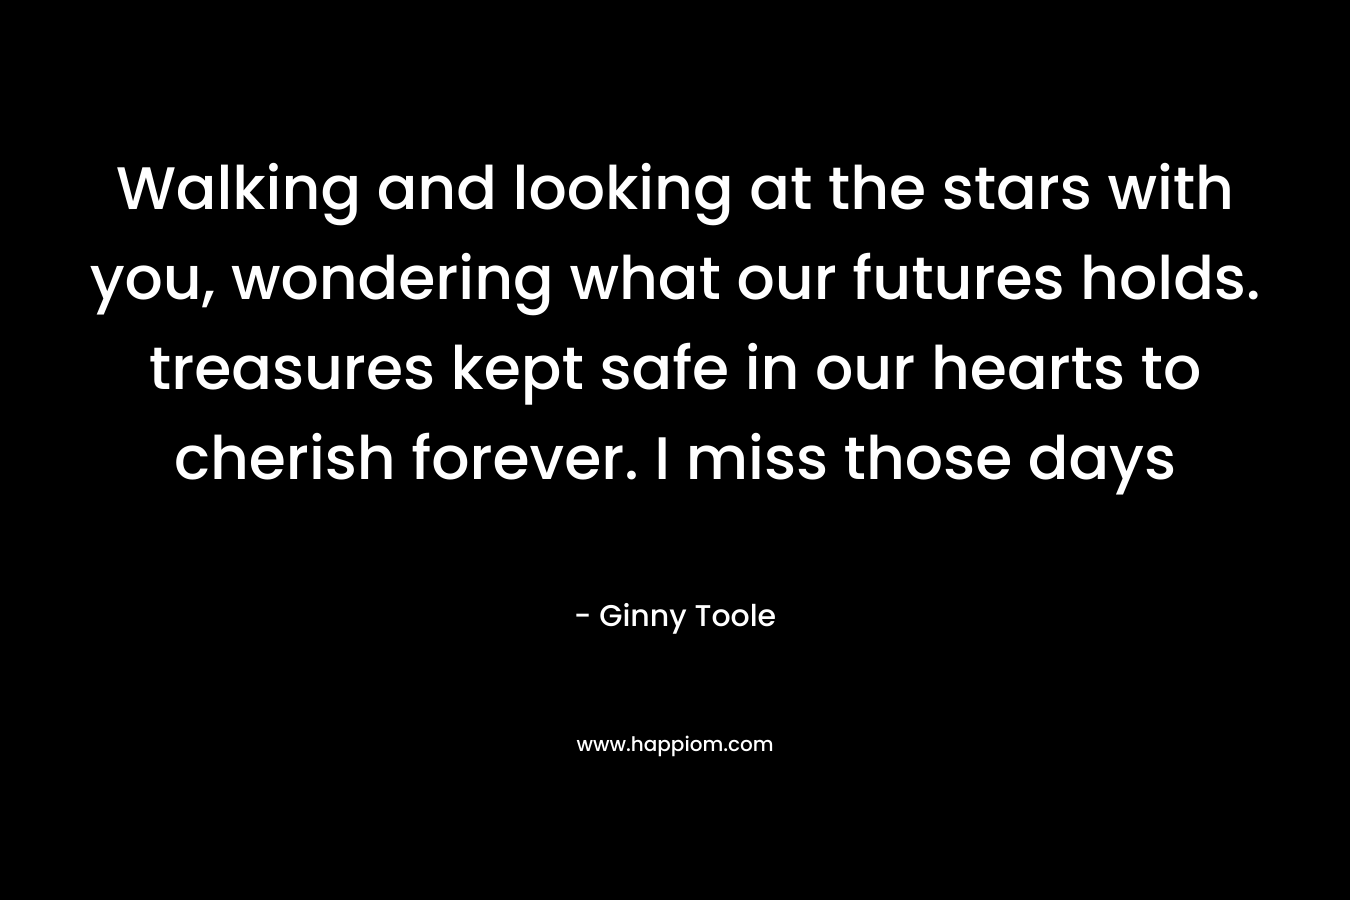 Walking and looking at the stars with you, wondering what our futures holds. treasures kept safe in our hearts to cherish forever. I miss those days – Ginny Toole